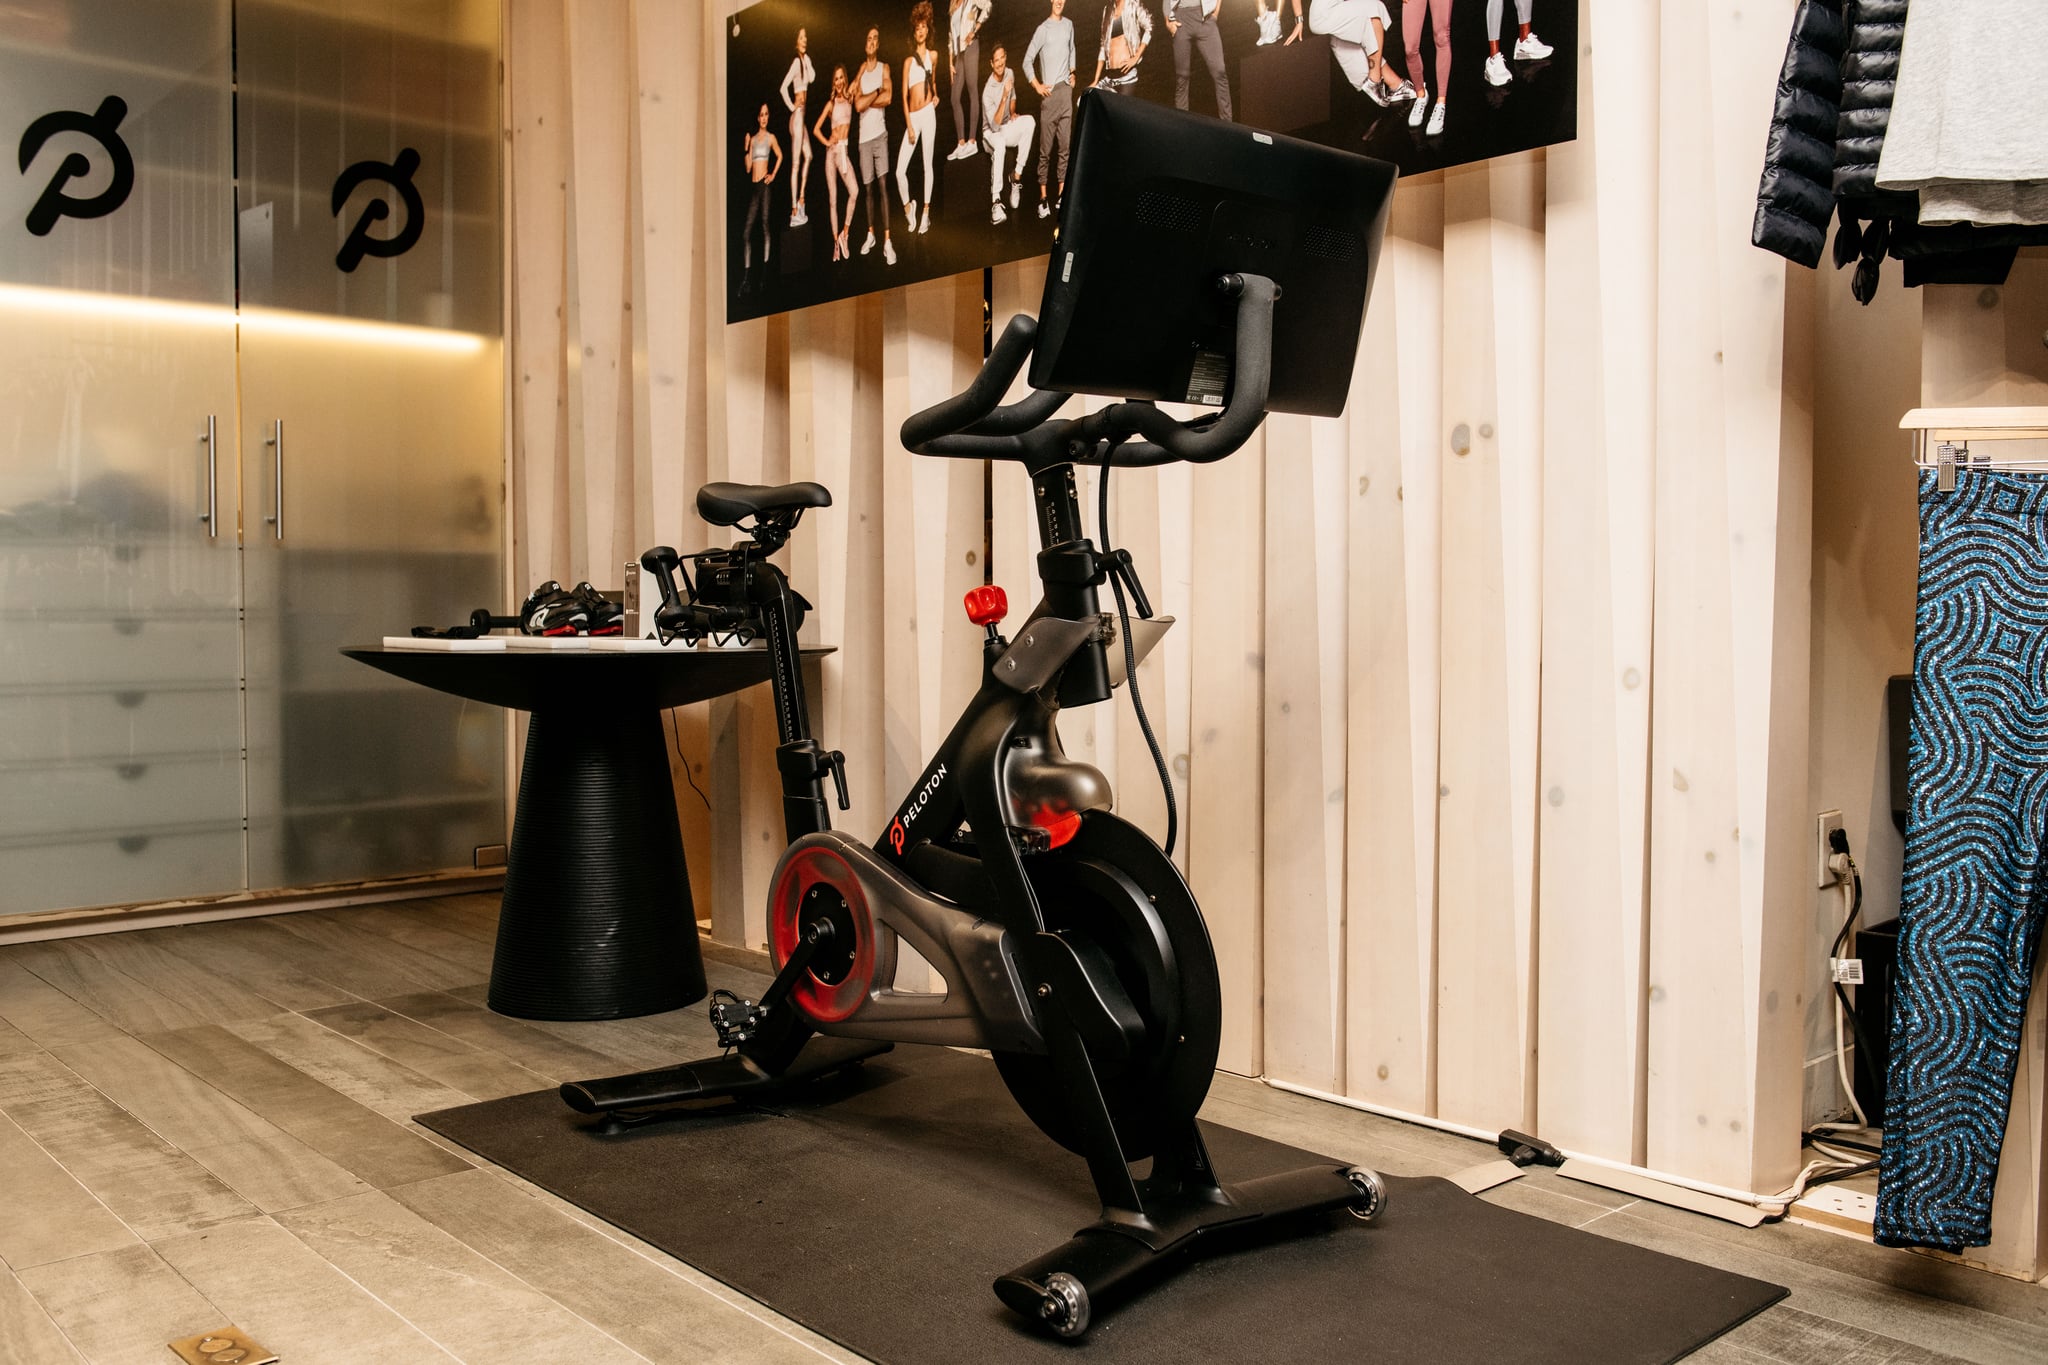 NEW YORK, NY - DECEMBER 04: A Peloton stationary bike sits on display at one of the brand's studios; how much is a peloton bike?(Photo by Scott Heins/Getty Images)